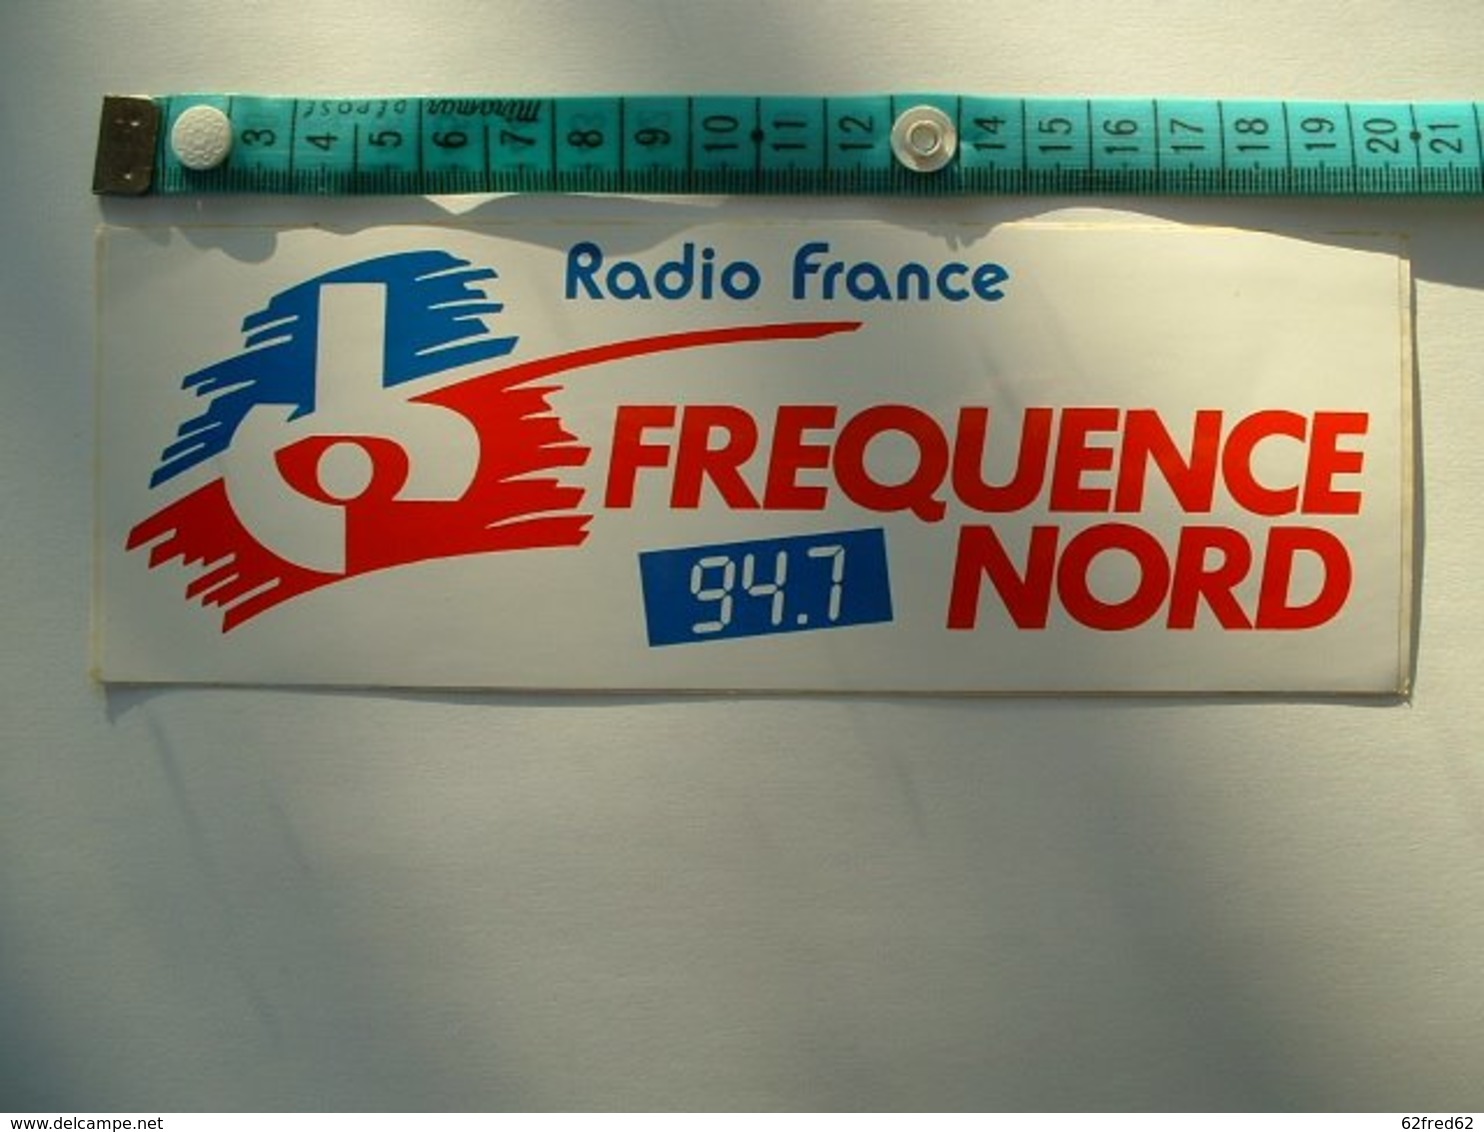 AUTOCOLLANT RADIO FRANCE FREQUENCE NORD - Stickers